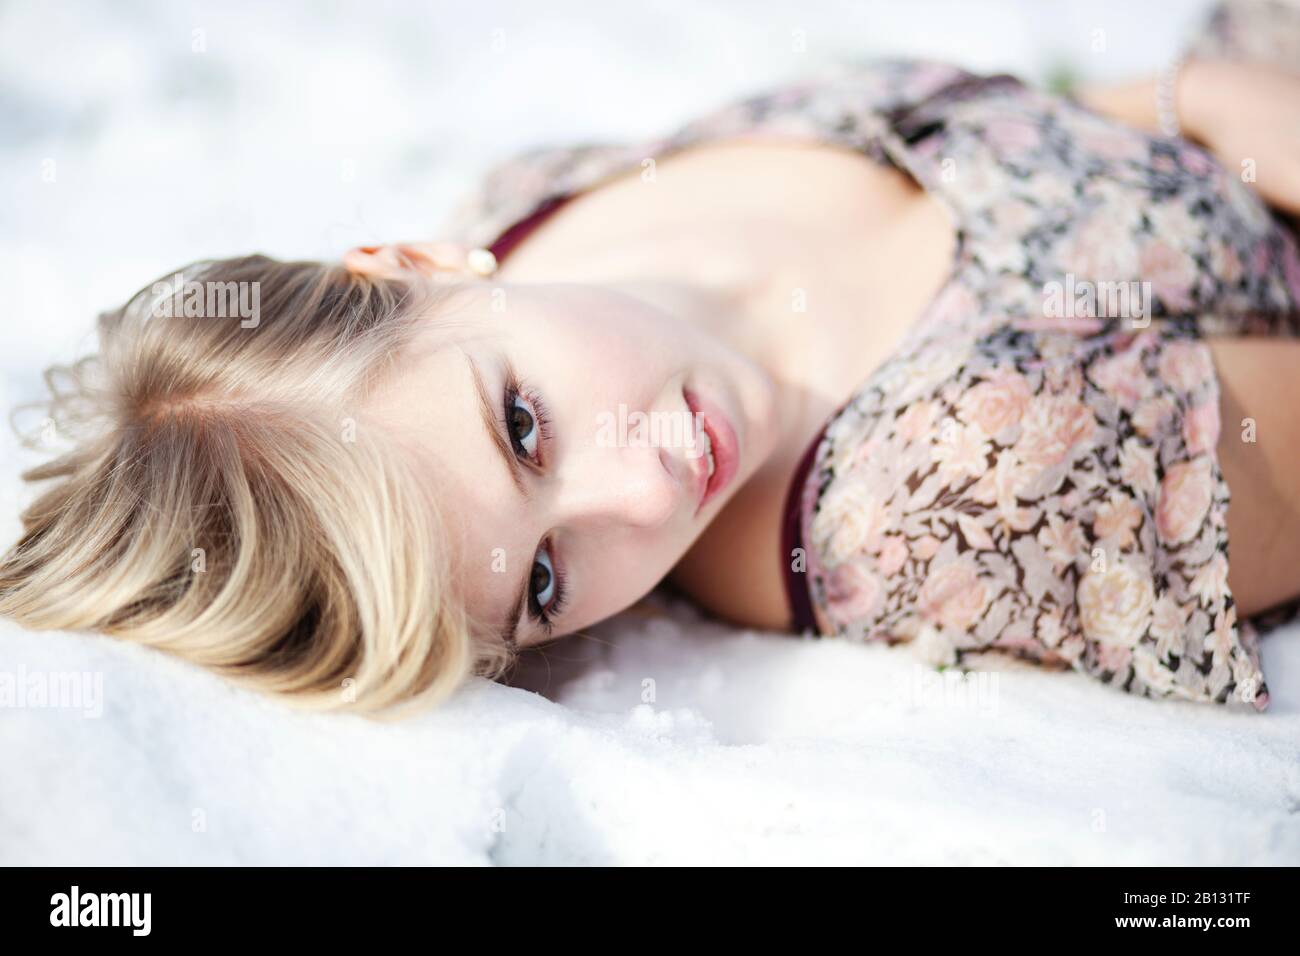 Young woman lying in snow,portrait Stock Photo